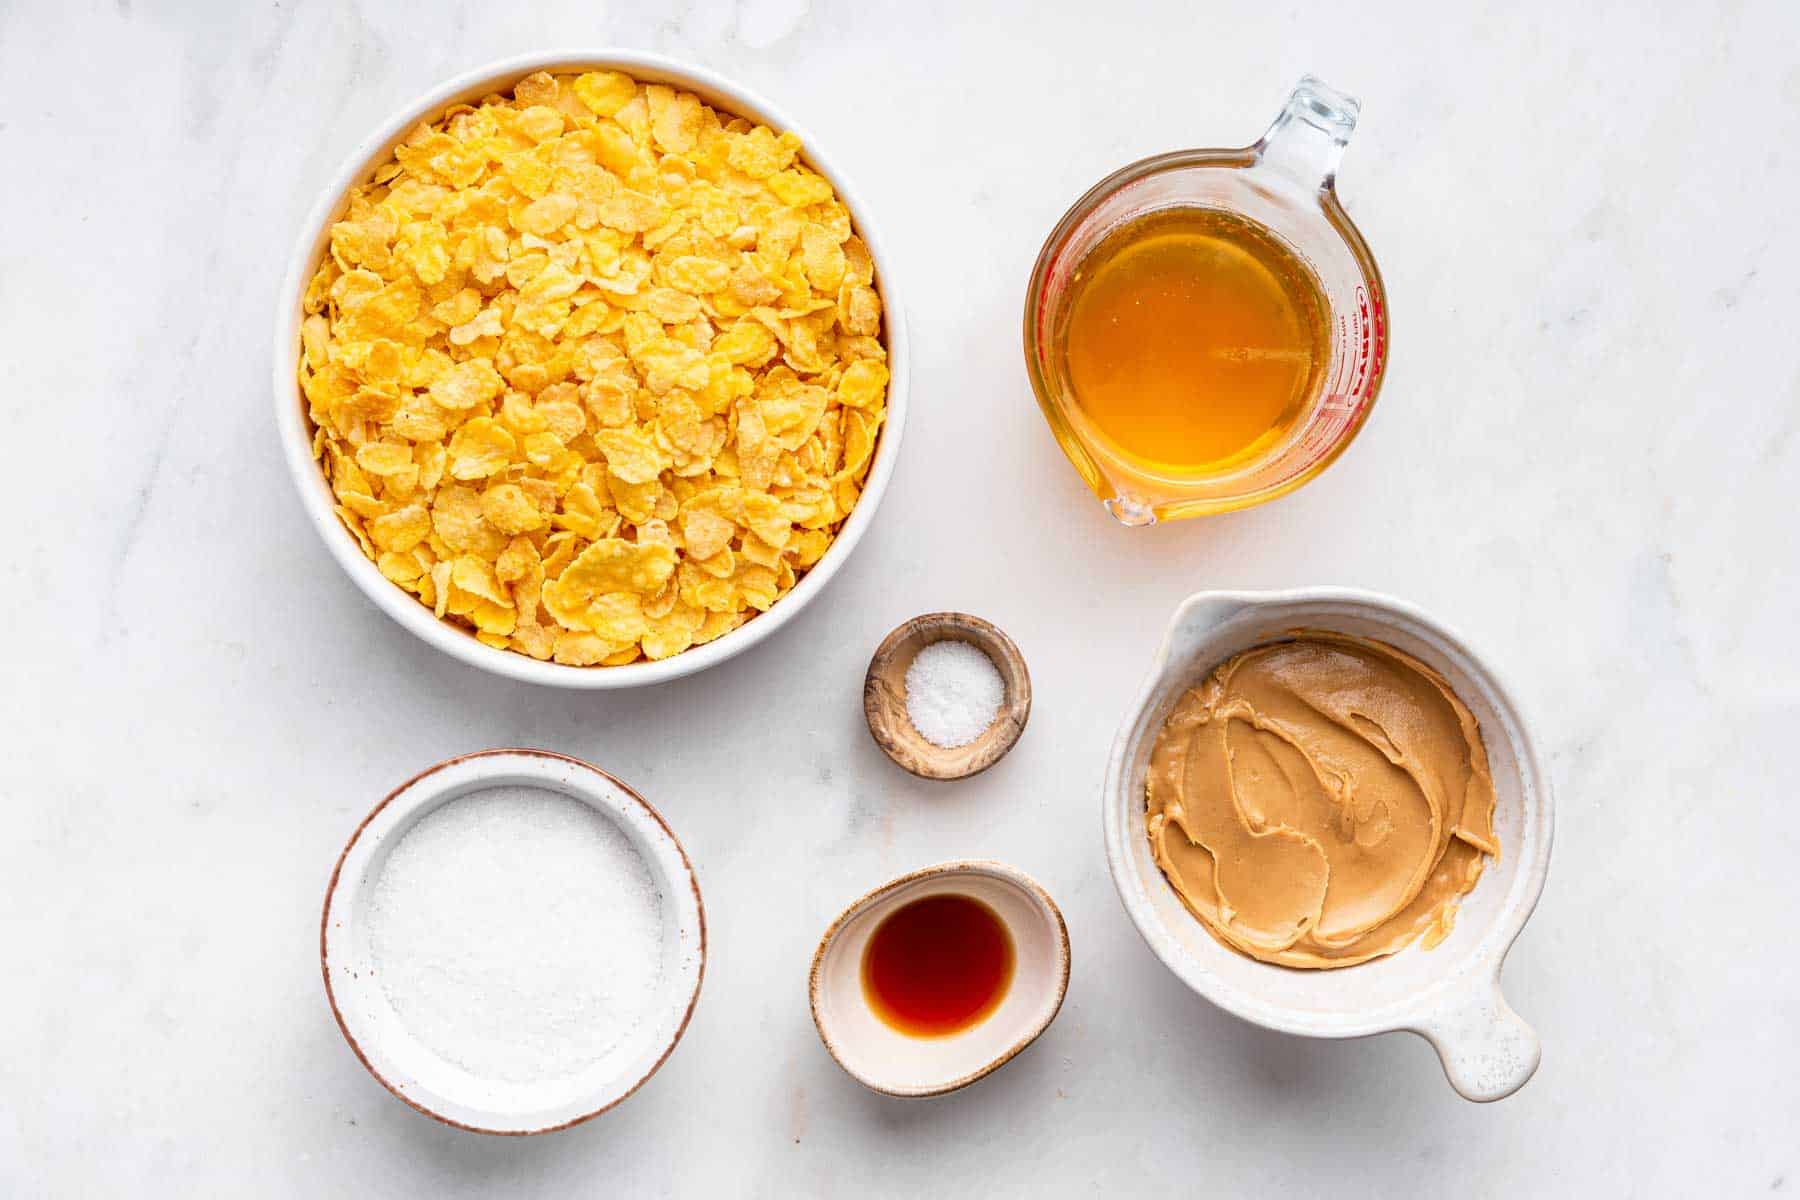 Bowl of cornflakes, sugar, honey, and peanut butter on counter.